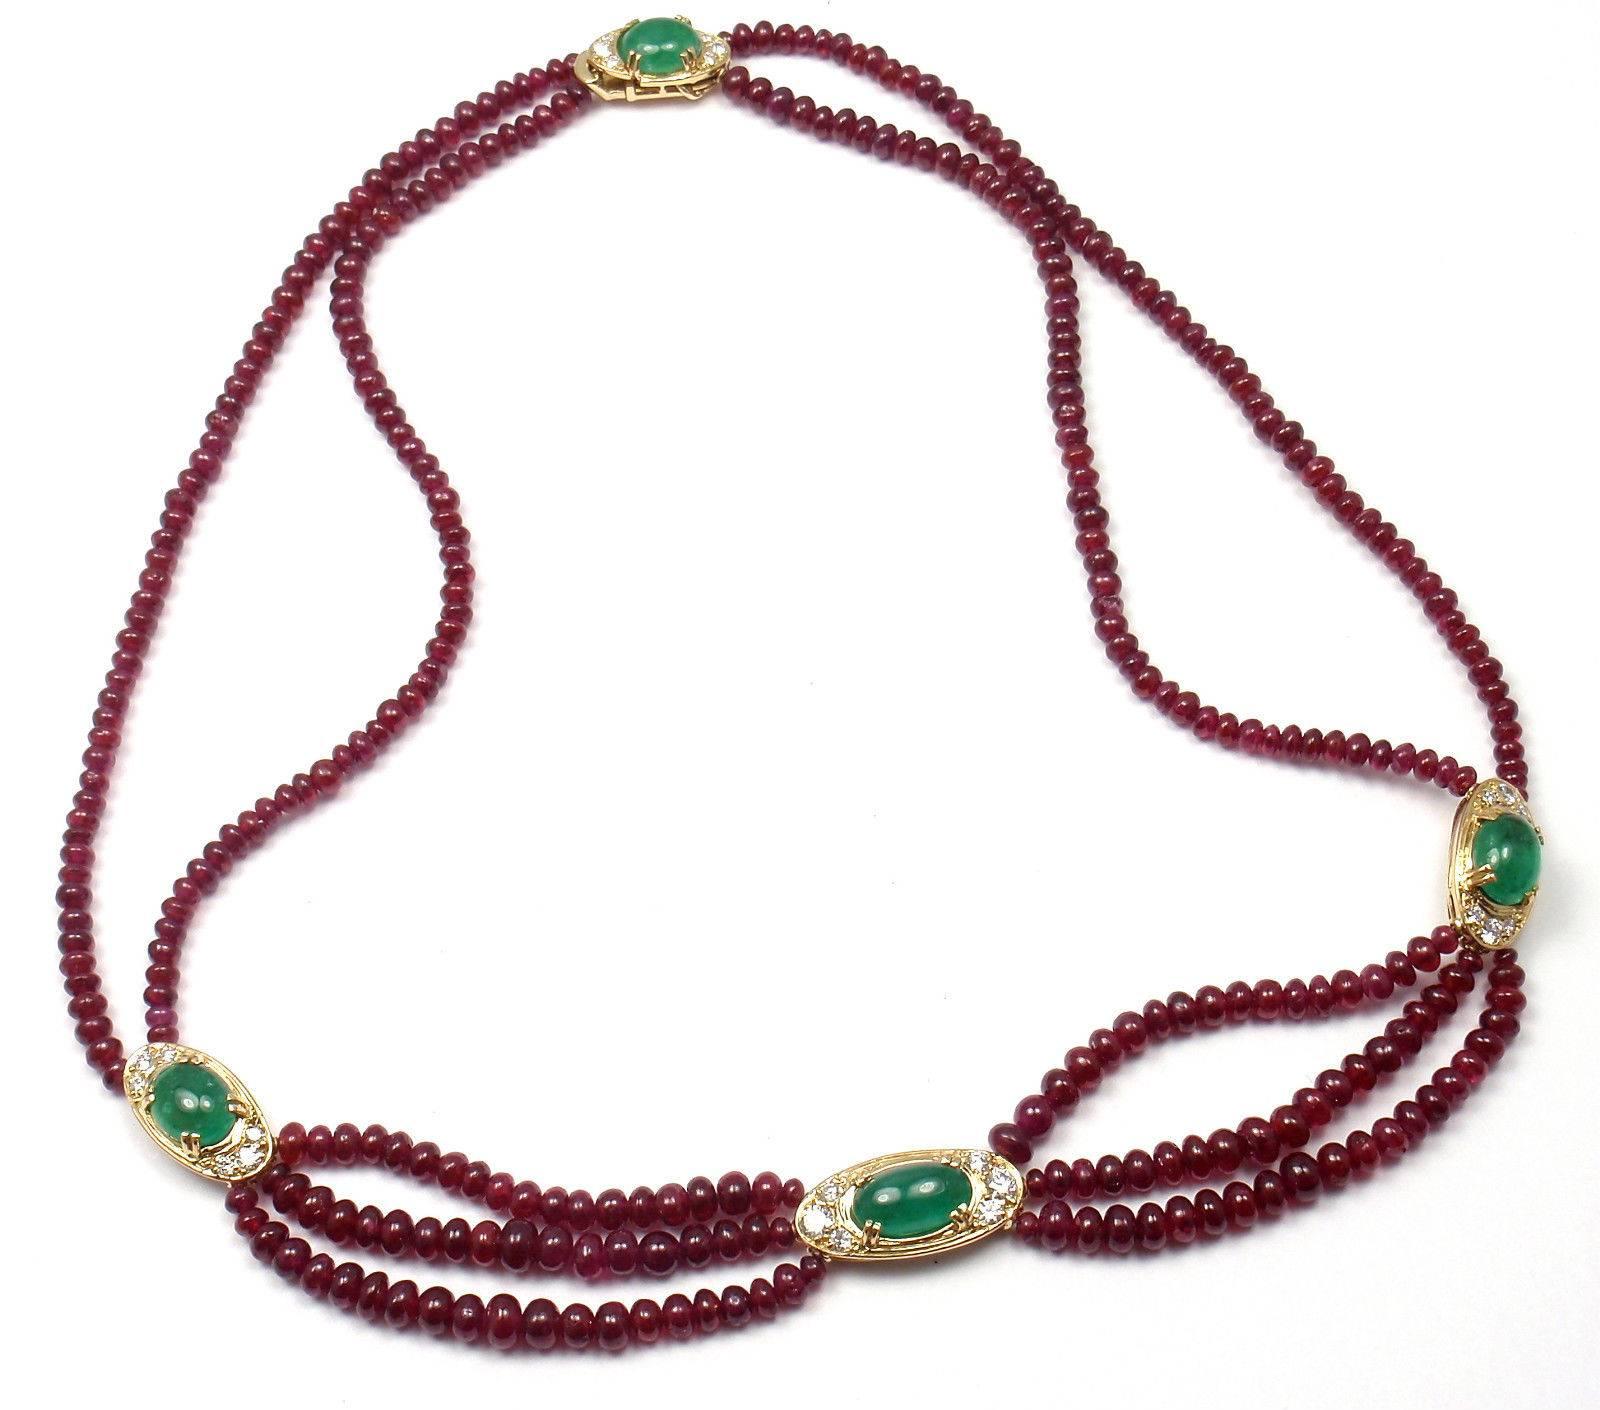 18k Yellow Gold Ruby Beads Emerald And Diamond Necklace.
This necklace comes with the service paper from Van Cleef & Arpels store in Japan.
With 24 round brilliant cut diamonds VVS1 clarity, E color total weight approx. .60ct
4 gorgeous color